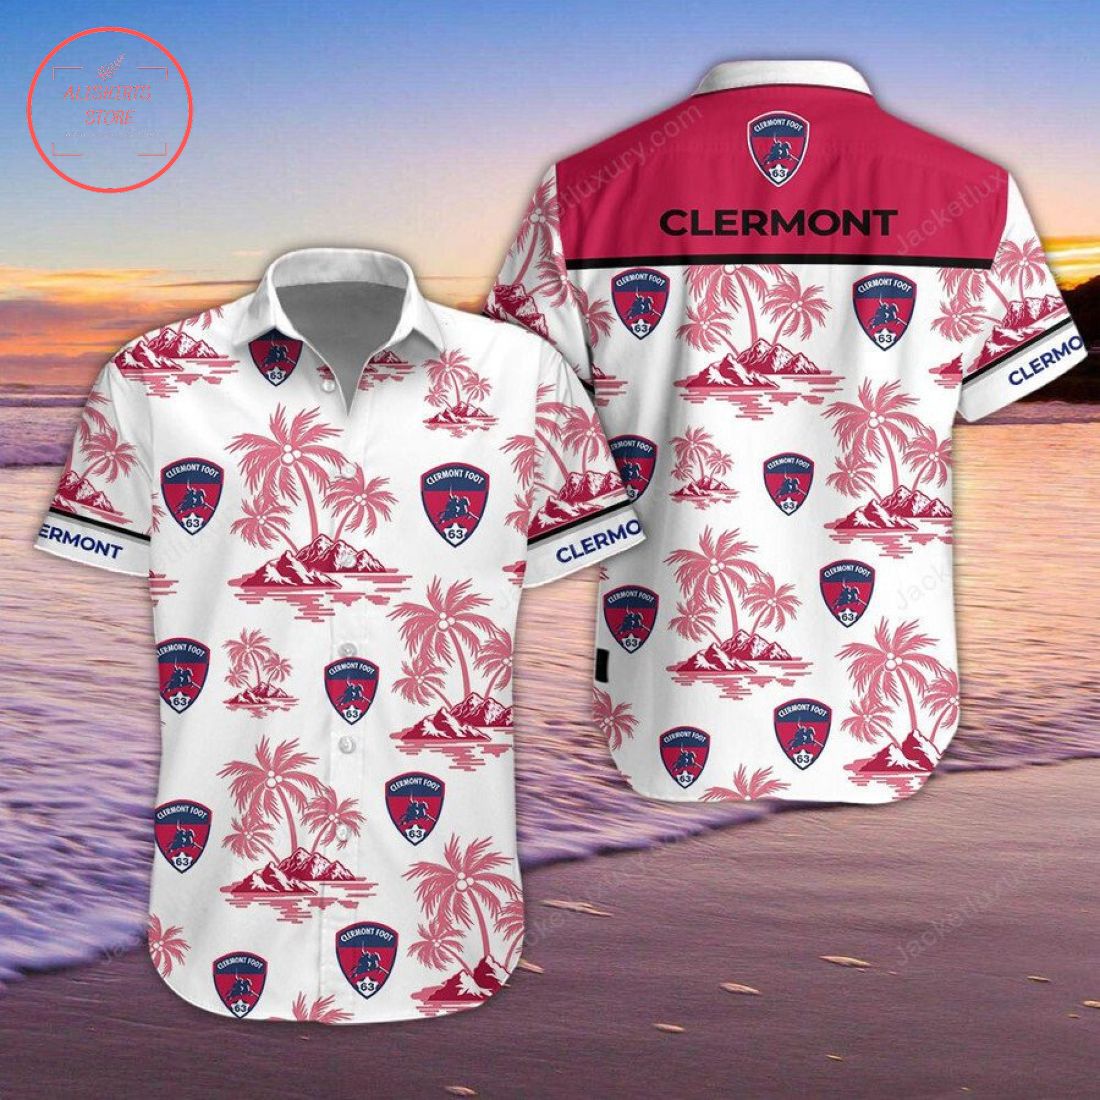 Clermont Foot Auvergne 63 Hawaiian Shirt and Shorts